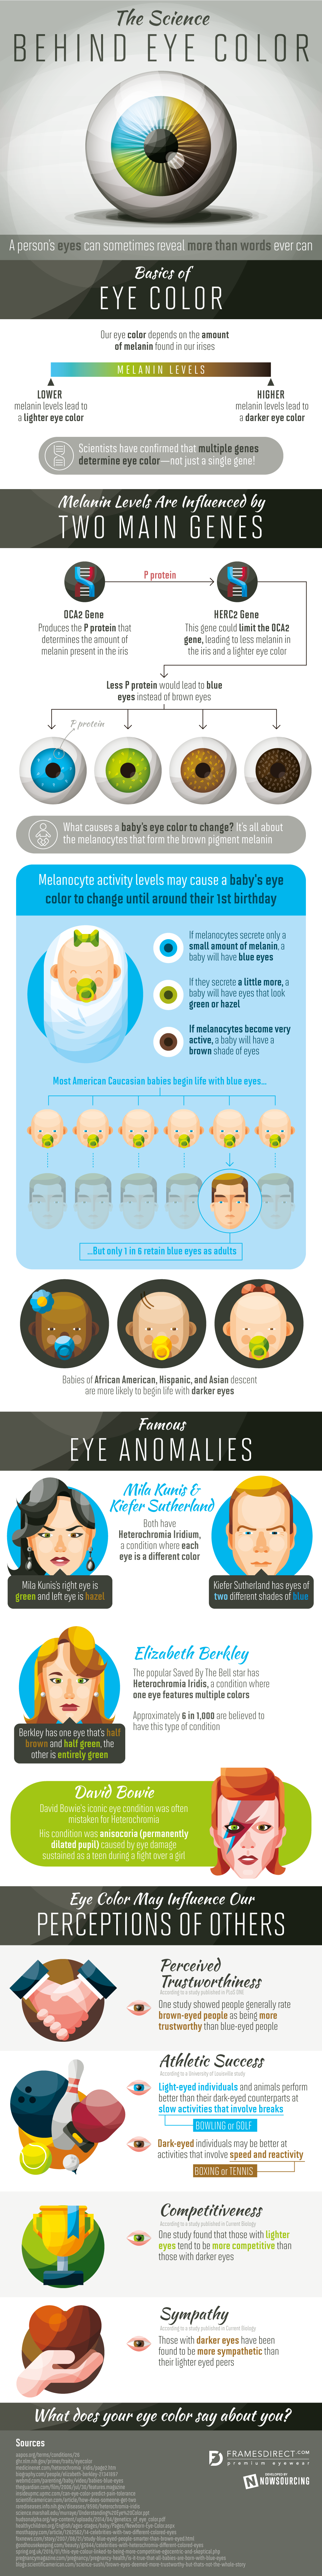 The Science Behind Eye Color